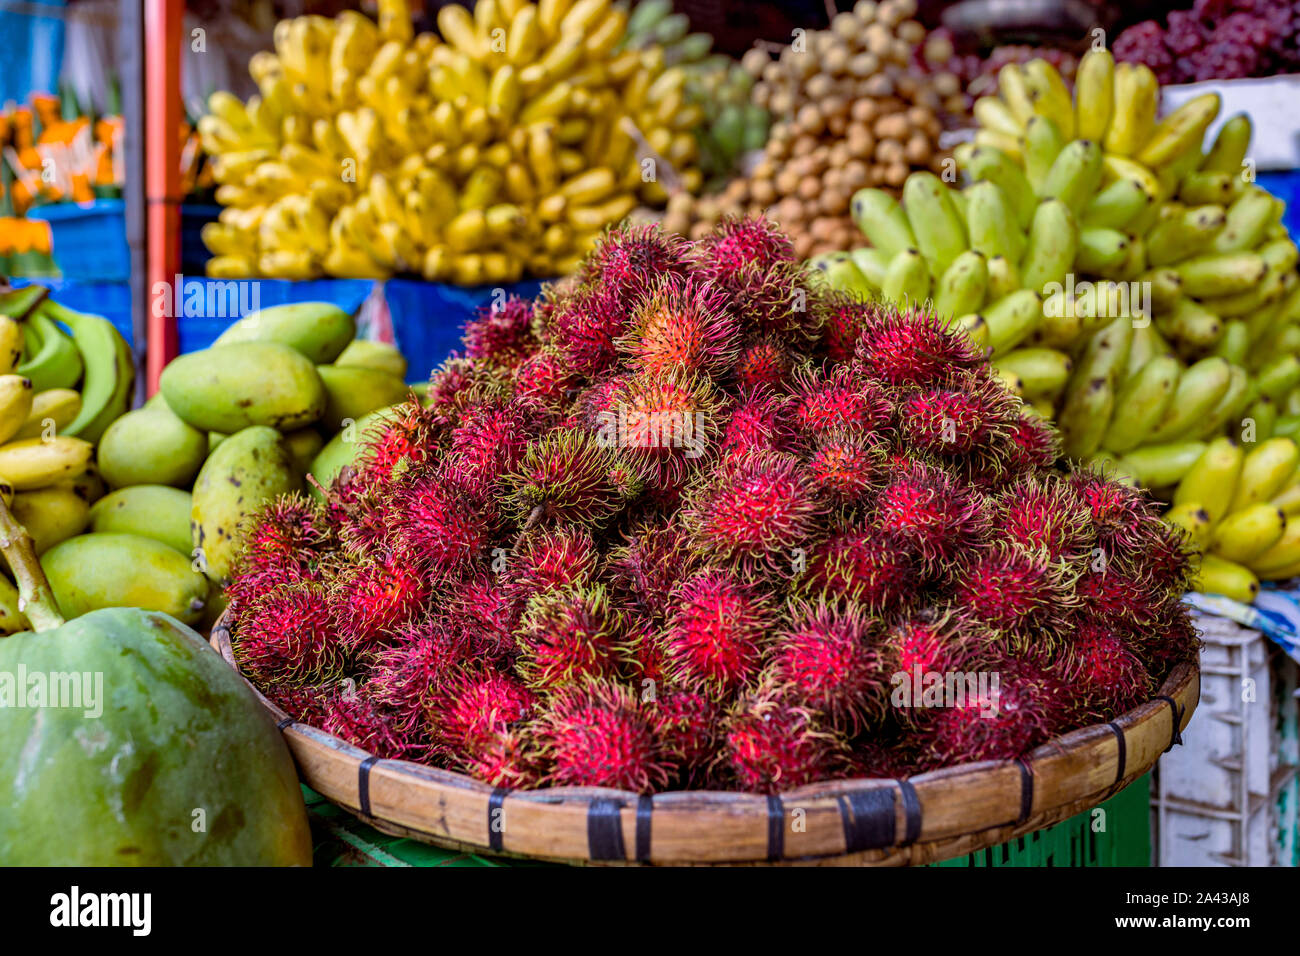 The most amazing and colourful fresh tropical fruit, including Rambutan, on sale in a street market in Luang Prabang in Laos. South East Asia Stock Photo